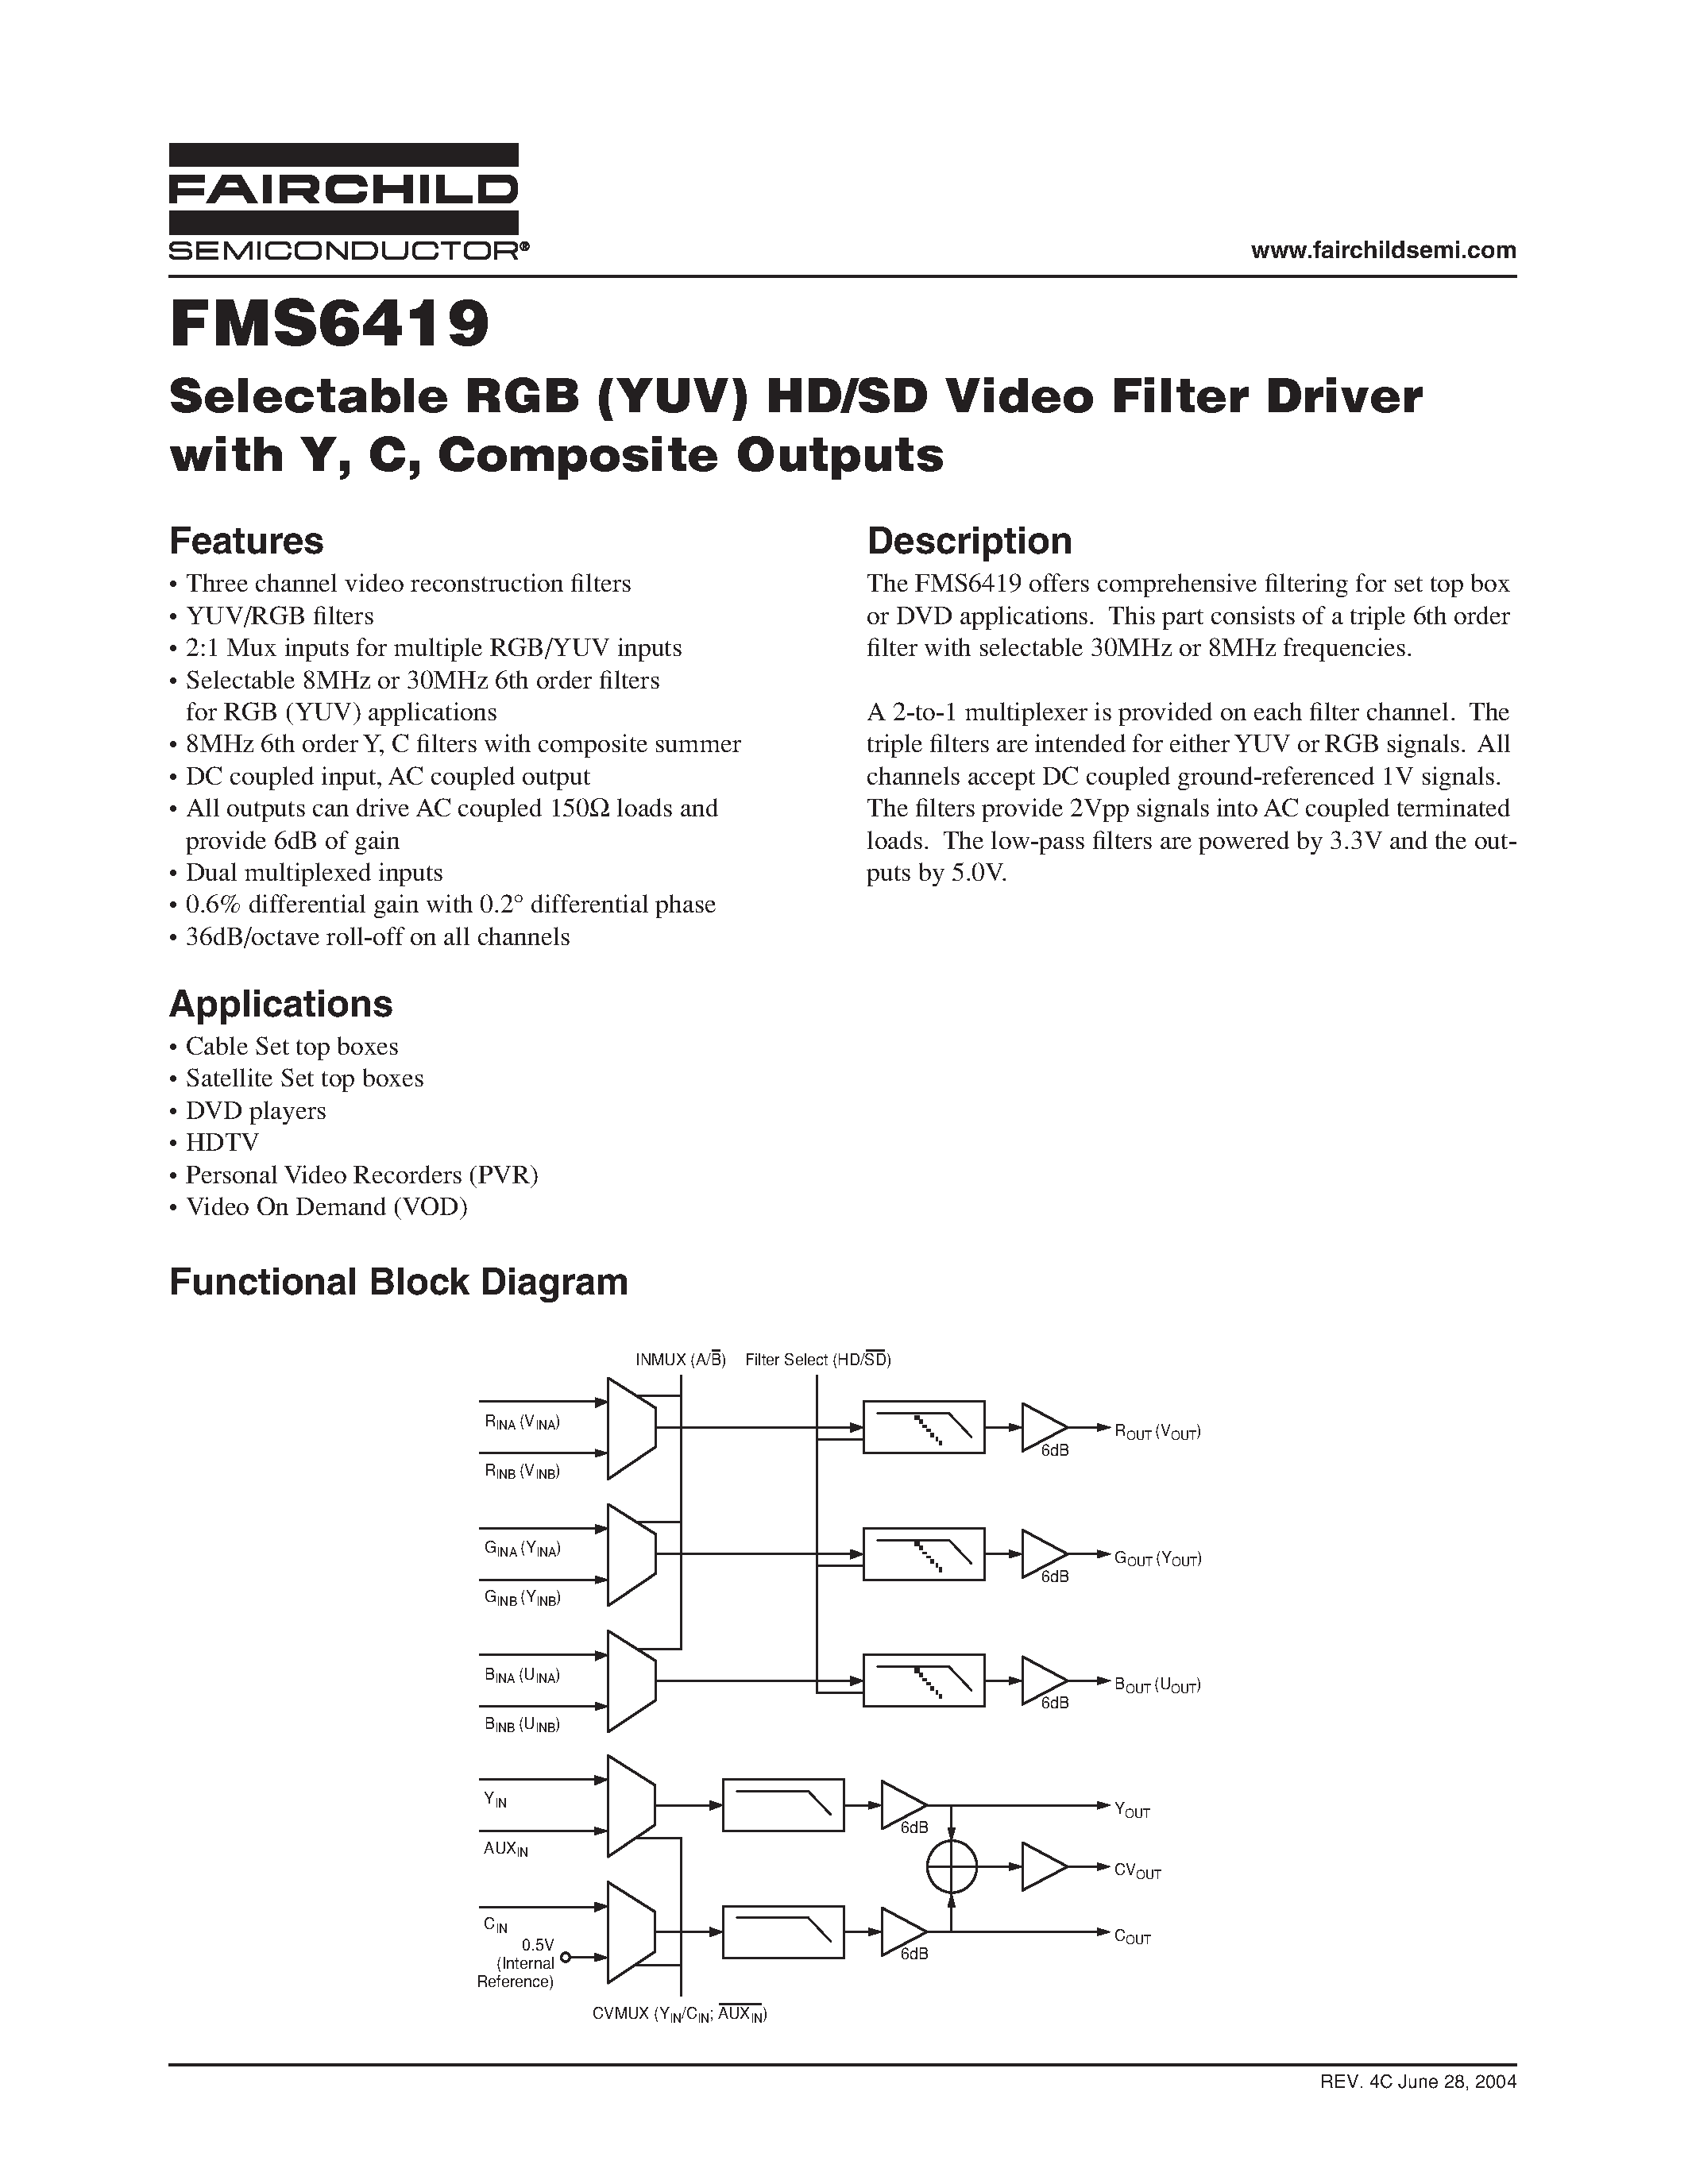 Datasheet FMS6419MSA28 - Selectable RGB (YUV) HD/SD Video Filter Driver with Y/ C/ Composite Outputs page 1